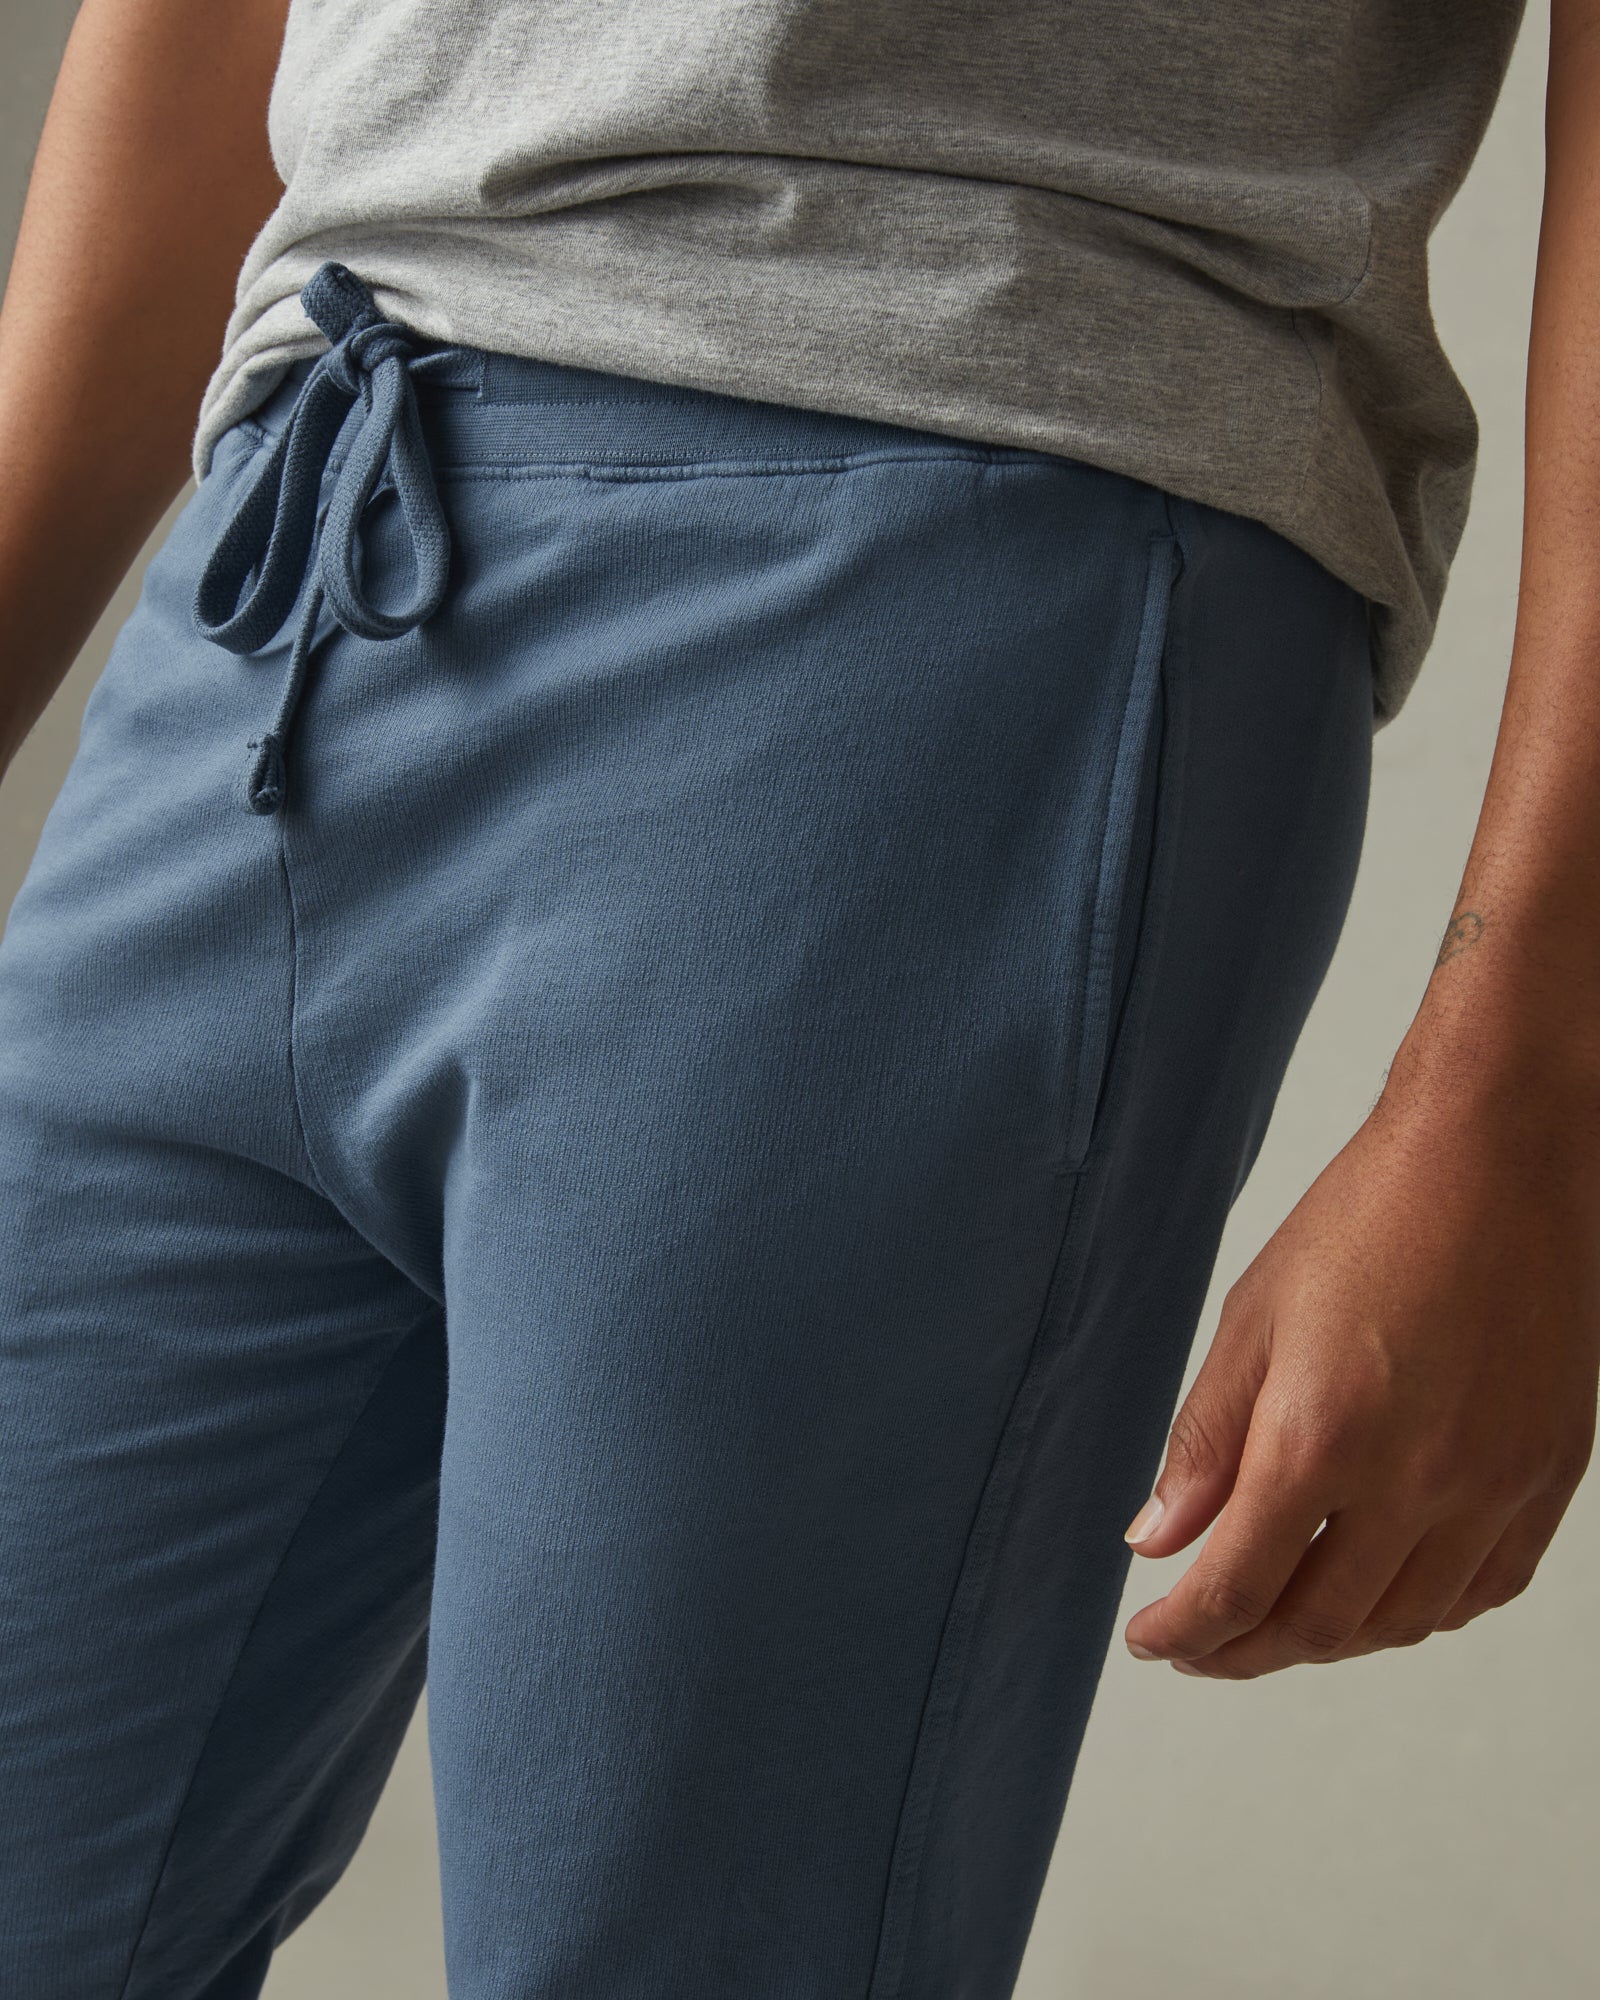 Lululemon - City Sweat Slim-Fit Tapered French Terry Sweatpants